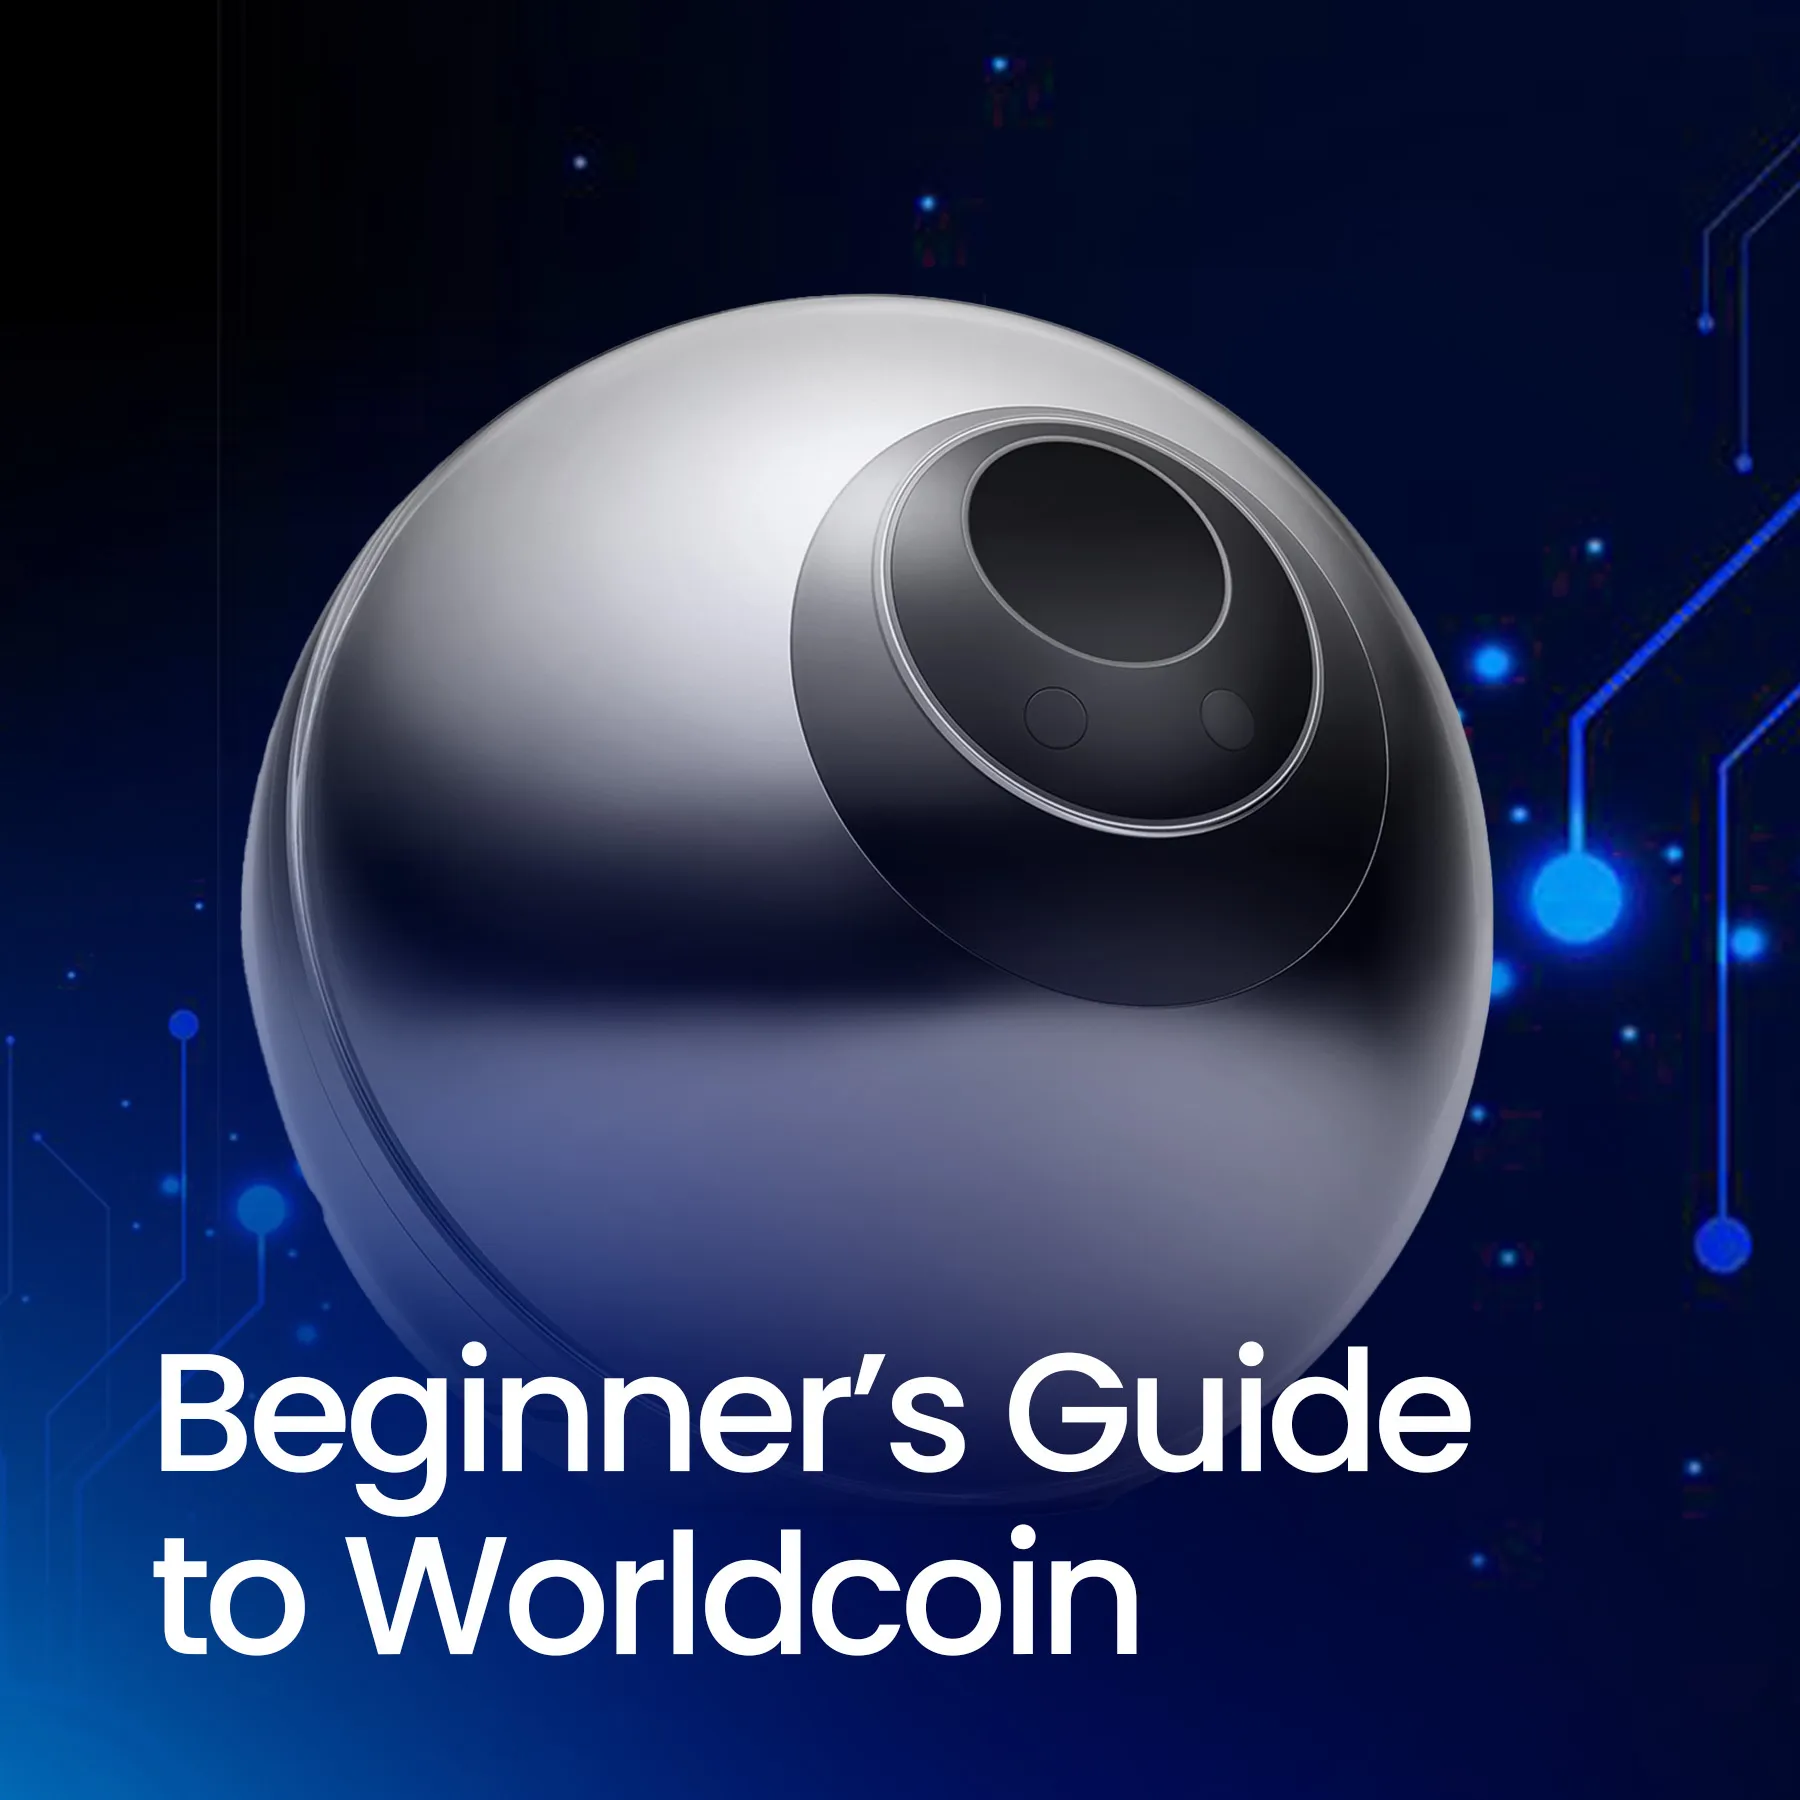 A Beginner’s Guide to Worldcoin